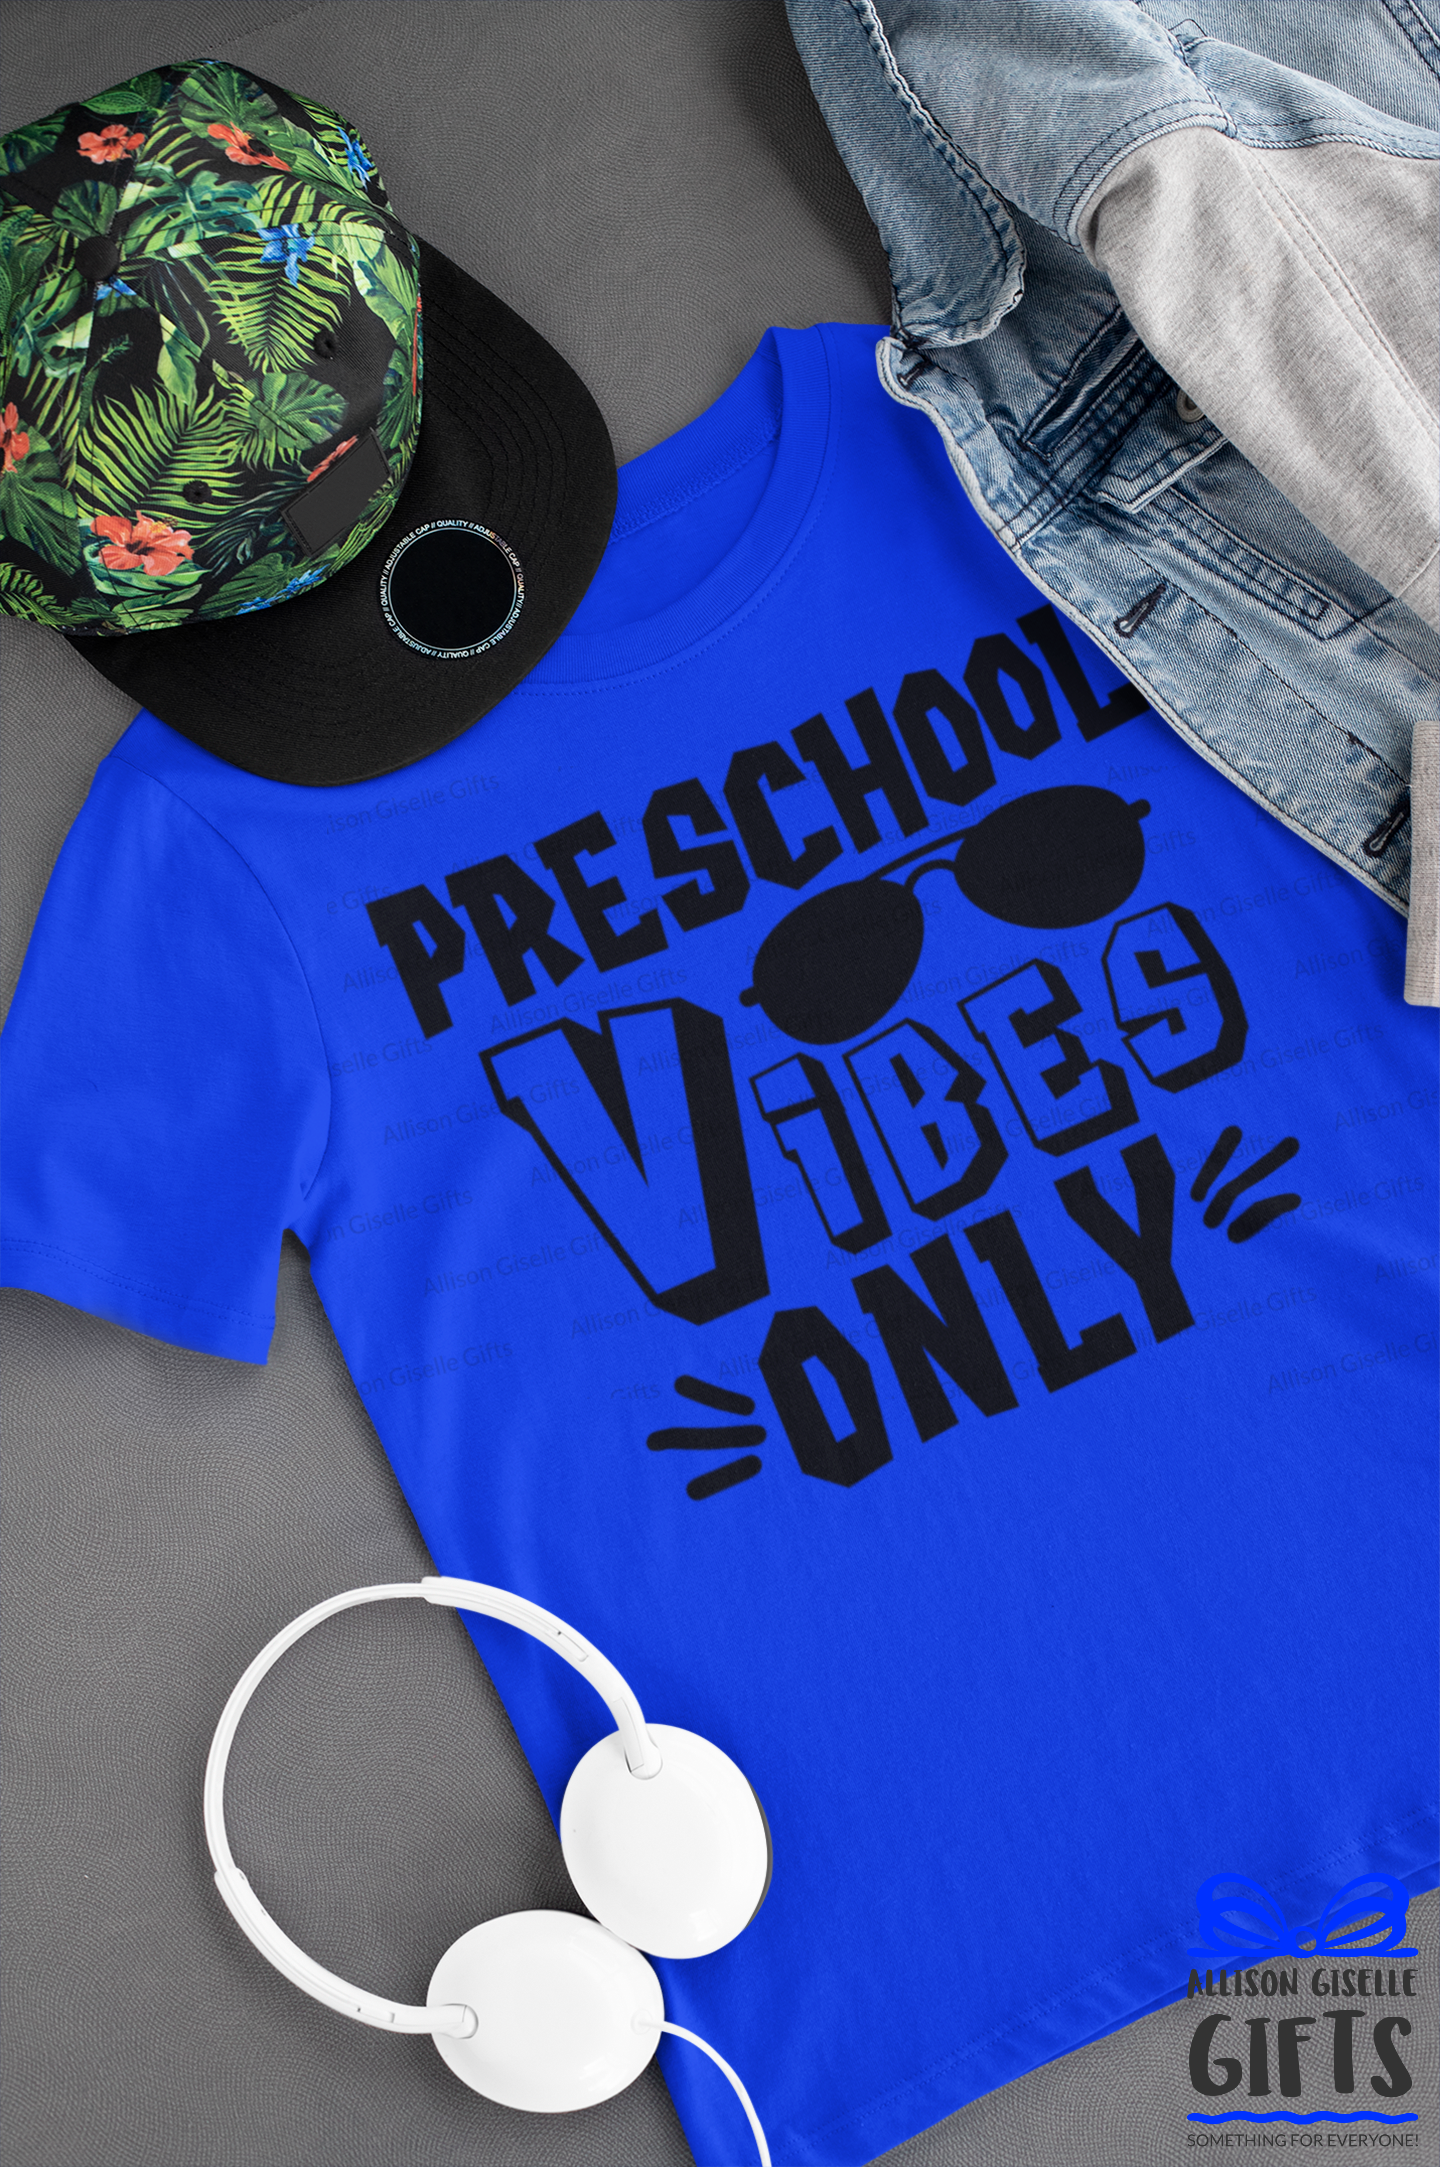 Preschool Vibes Only Shirt by Allison Giselle Gifts